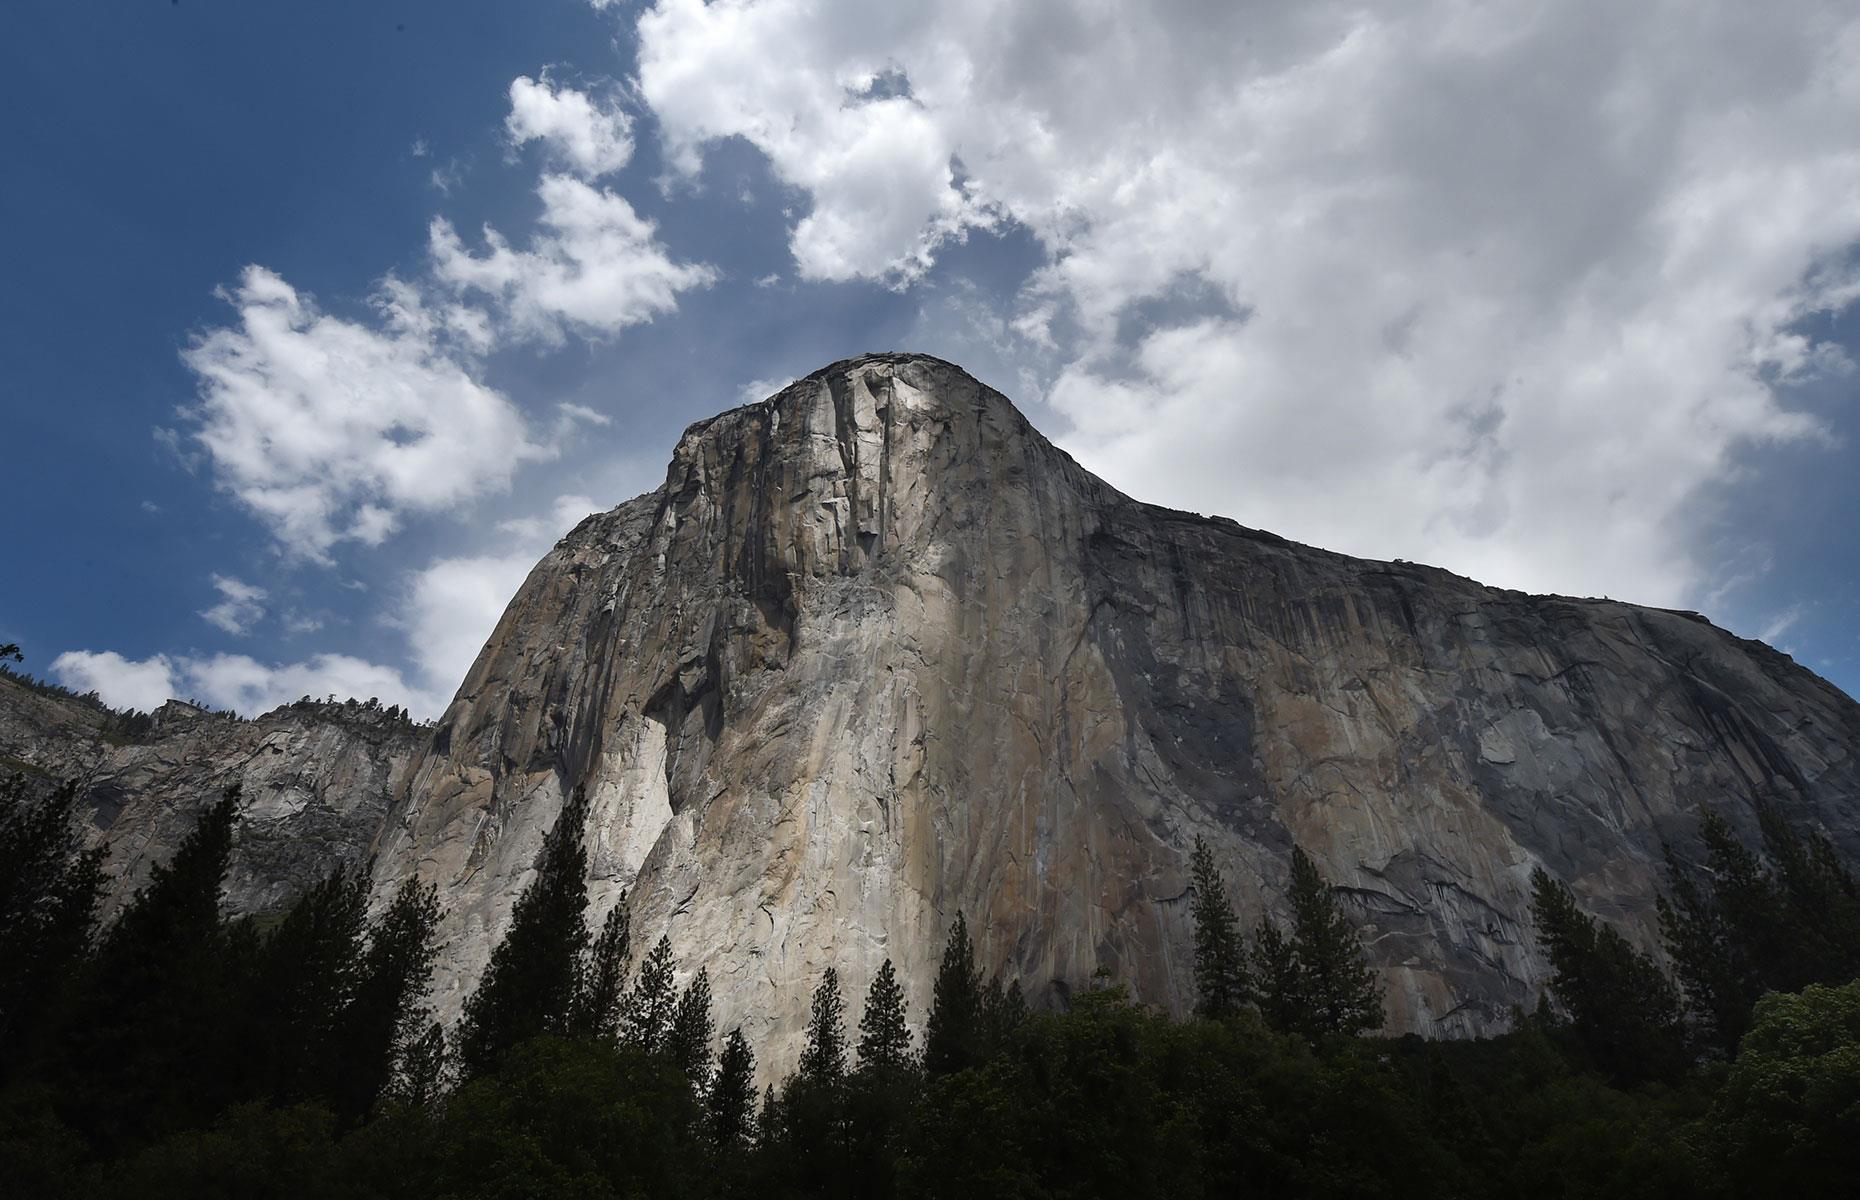 <p>One wrong move and Honnold would have plunged to his death, all while being filmed too, as the incredible story was been made into a movie, <em><a href="http://www.alexhonnold.com/">Free Solo</a></em>, that won best documentary feature at the 2019 Oscars. For the film, Honnold’s brain was scanned and it was discovered he doesn’t compute fear in the same way as the rest of us. It must run in the family as Honnold's mum, Dierdre Wolownick, is the oldest woman to scale El Capitan too. </p>  <p><strong><a href="https://www.loveexploring.com/gallerylist/90563/americas-most-stunning-natural-wonders">See more of America's incredible natural sights here</a></strong></p>